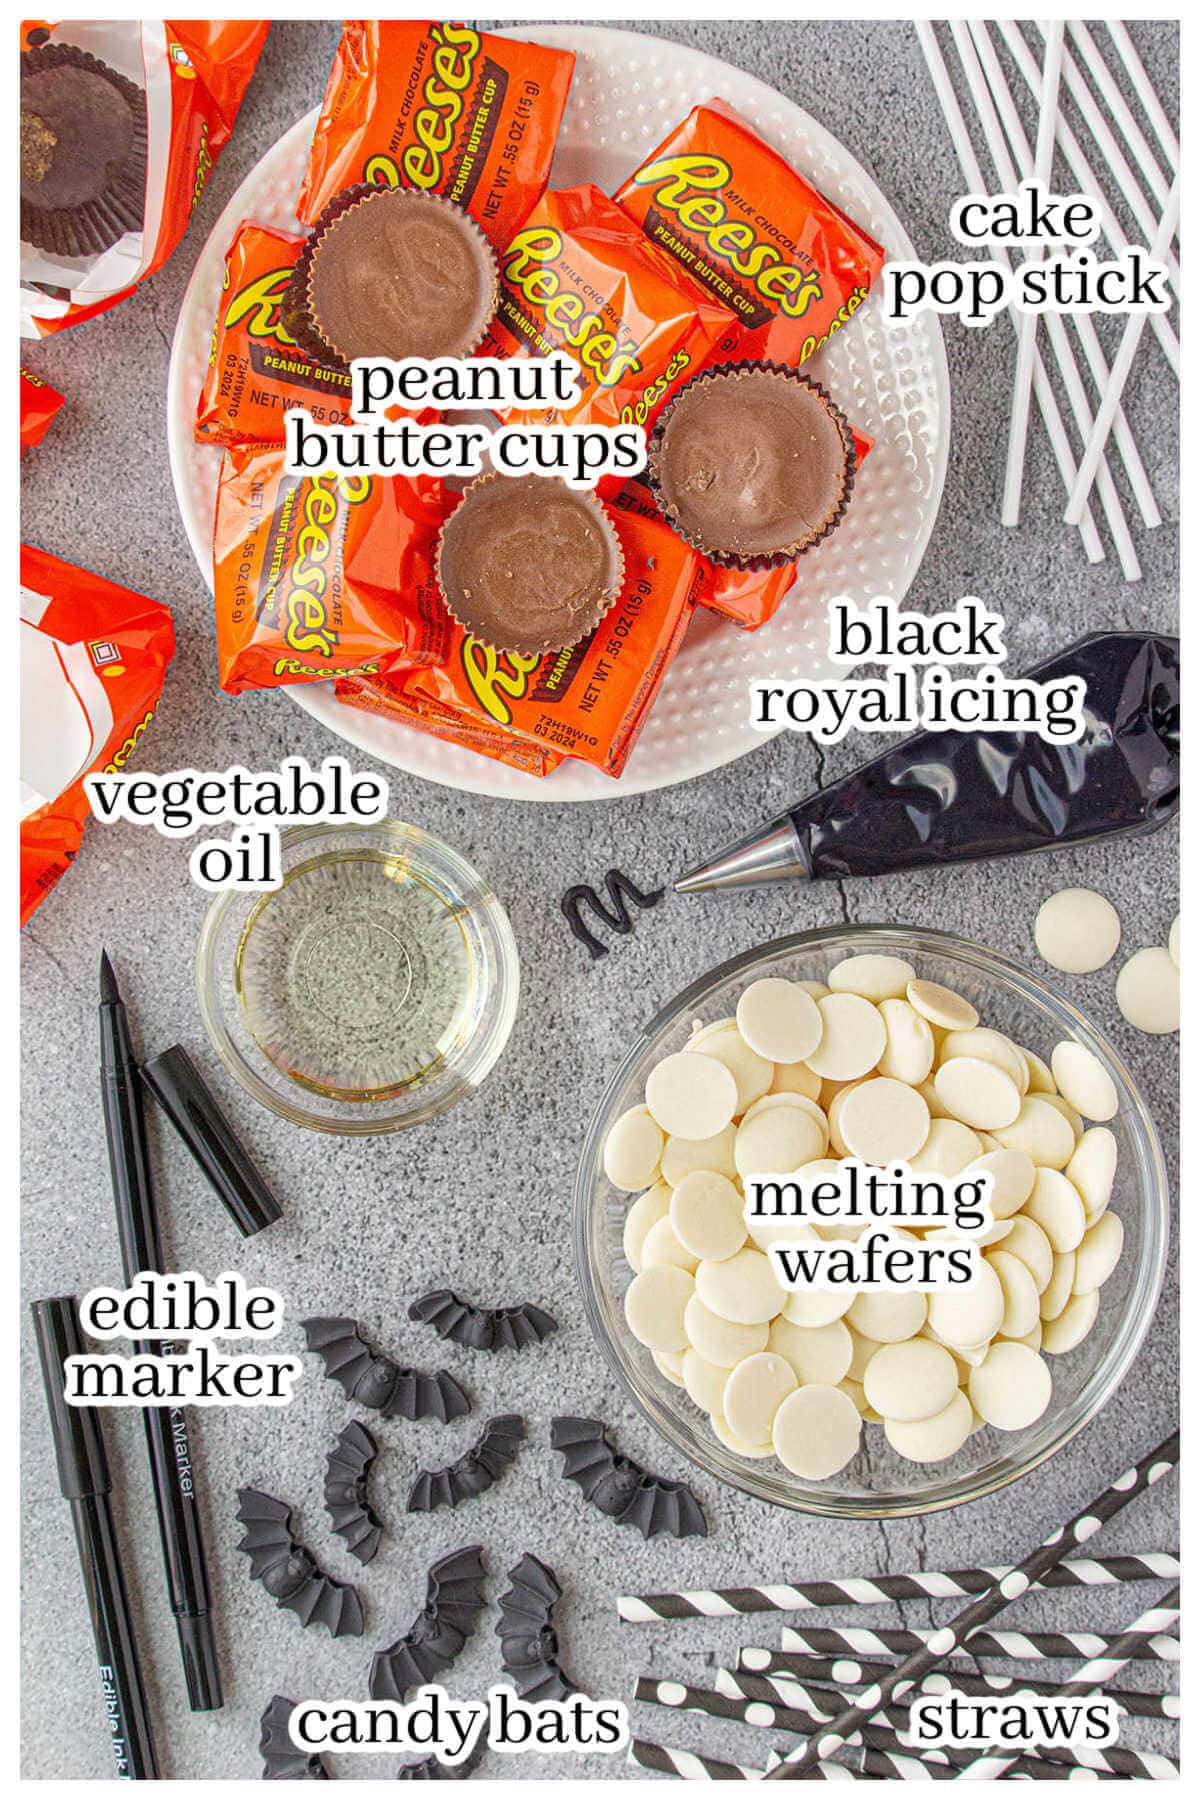 Ingredients to make the fun Halloween treat. With print overlay.